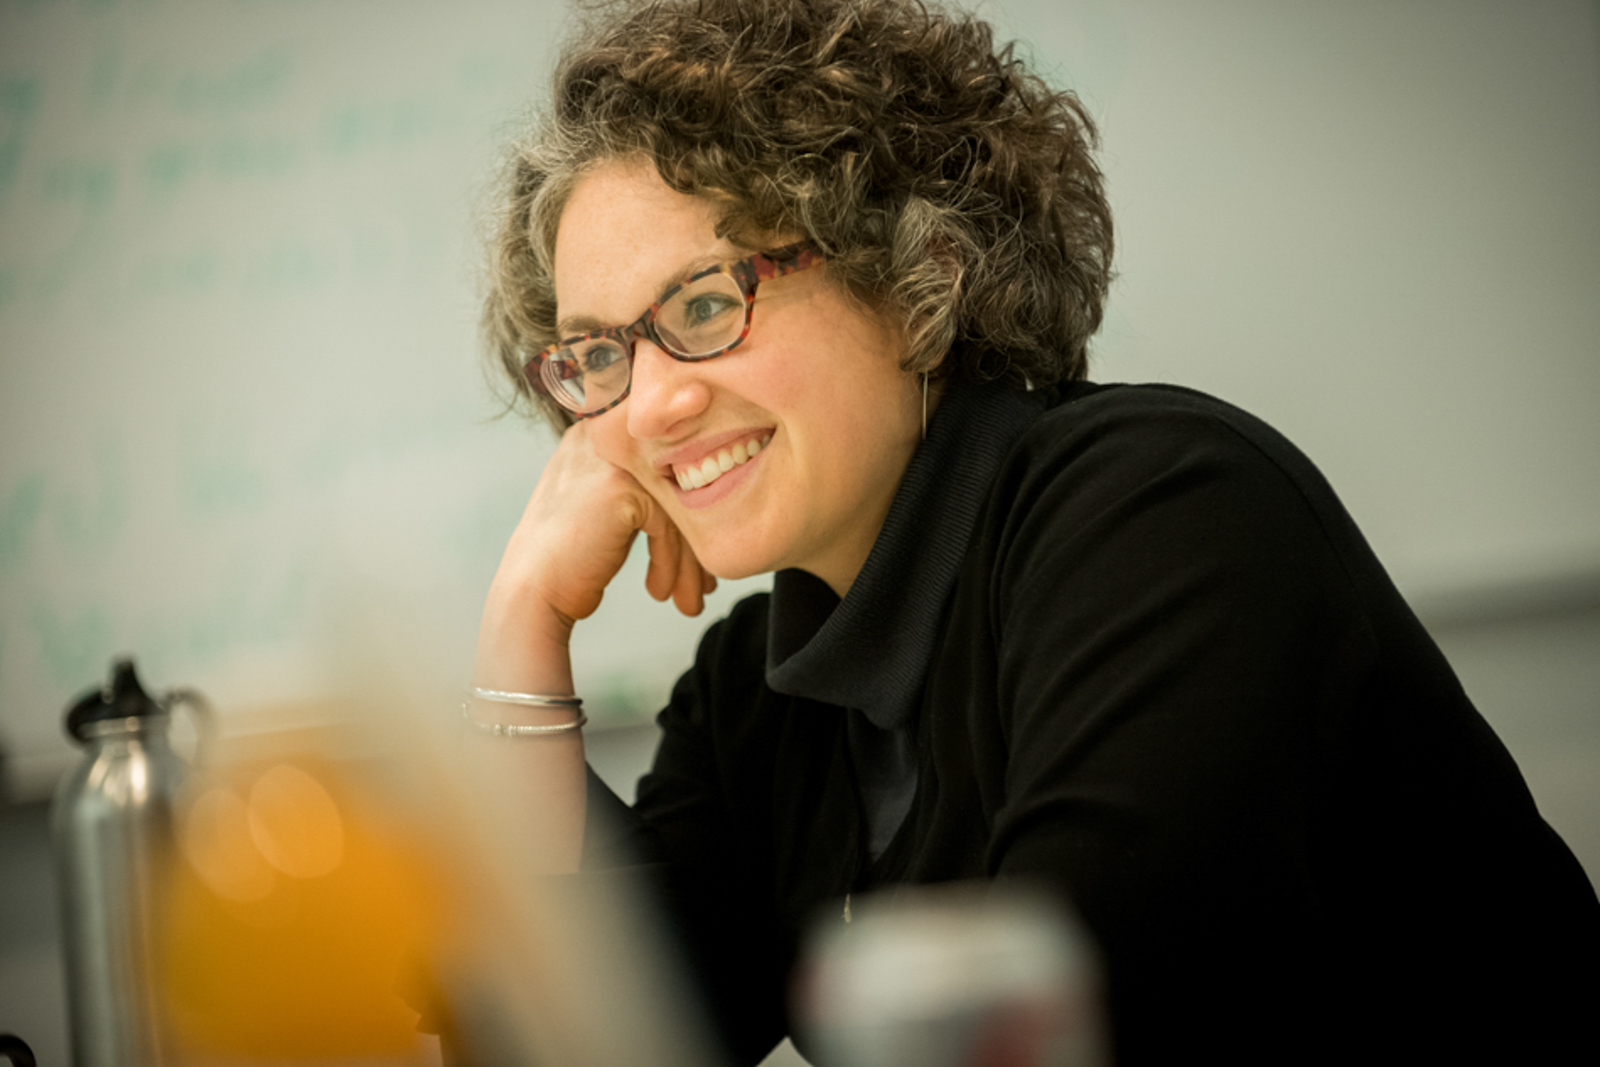 Candid of woman smiling during a meeting